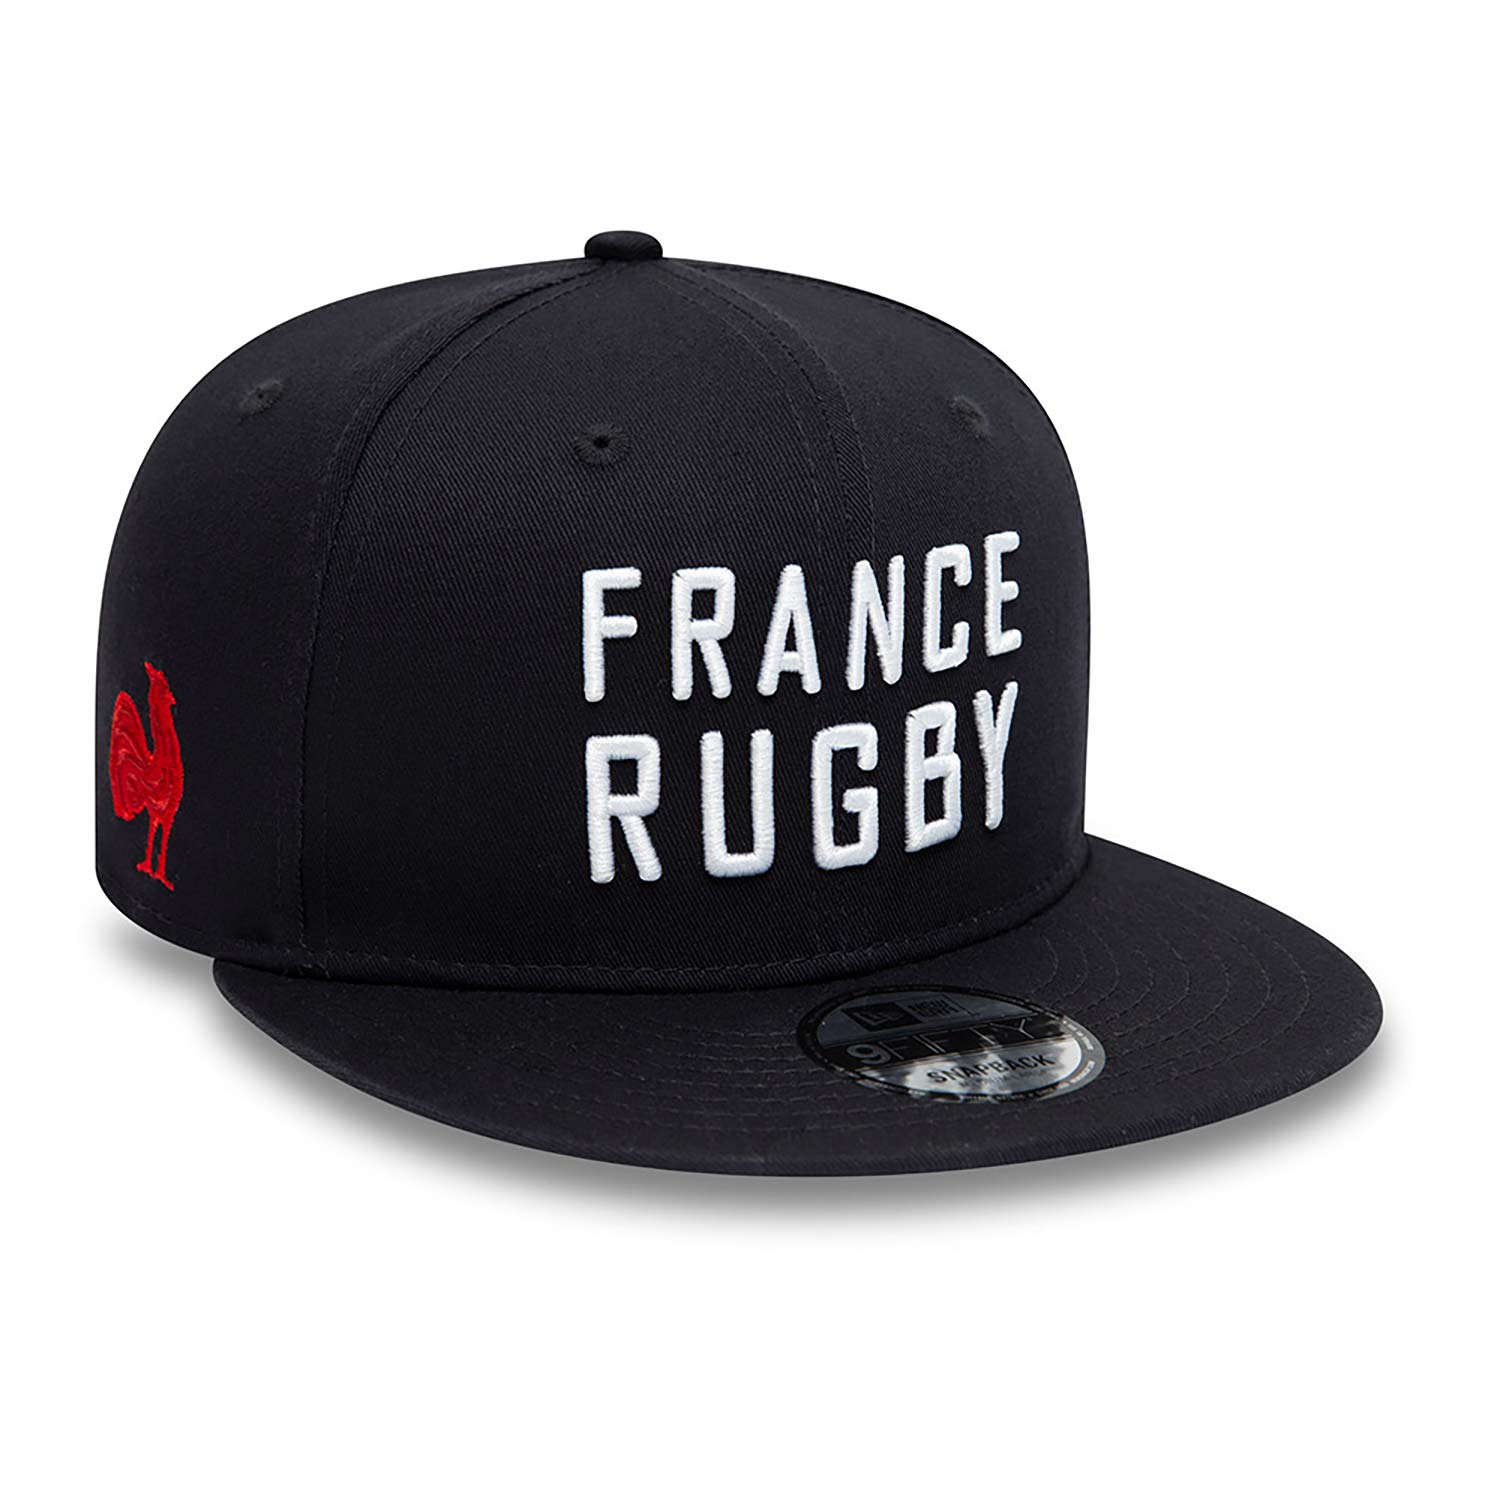 French Federation Of Rugby Wordmark Navy 9FIFTY Snapback Cap